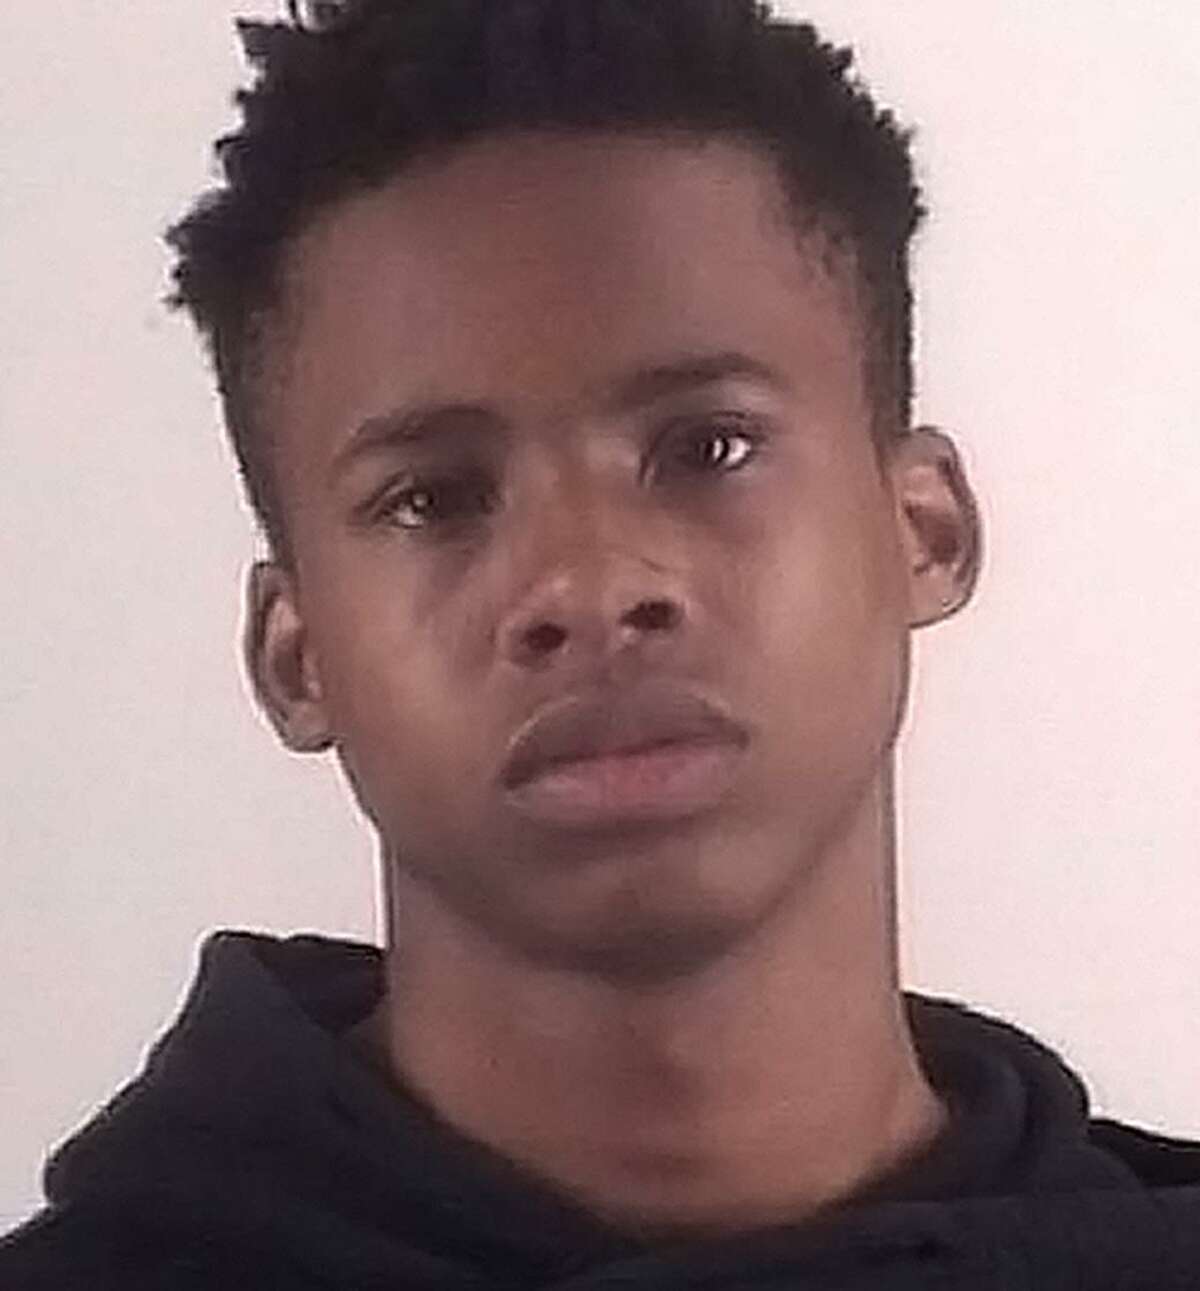 Taymor Travon McIntyre, also known as rapper Tay-K 47, has been charged with capital murder in connection with the April 23 fatal shooting at a North Side Chick-fil-A at 27 NE Loop 410.